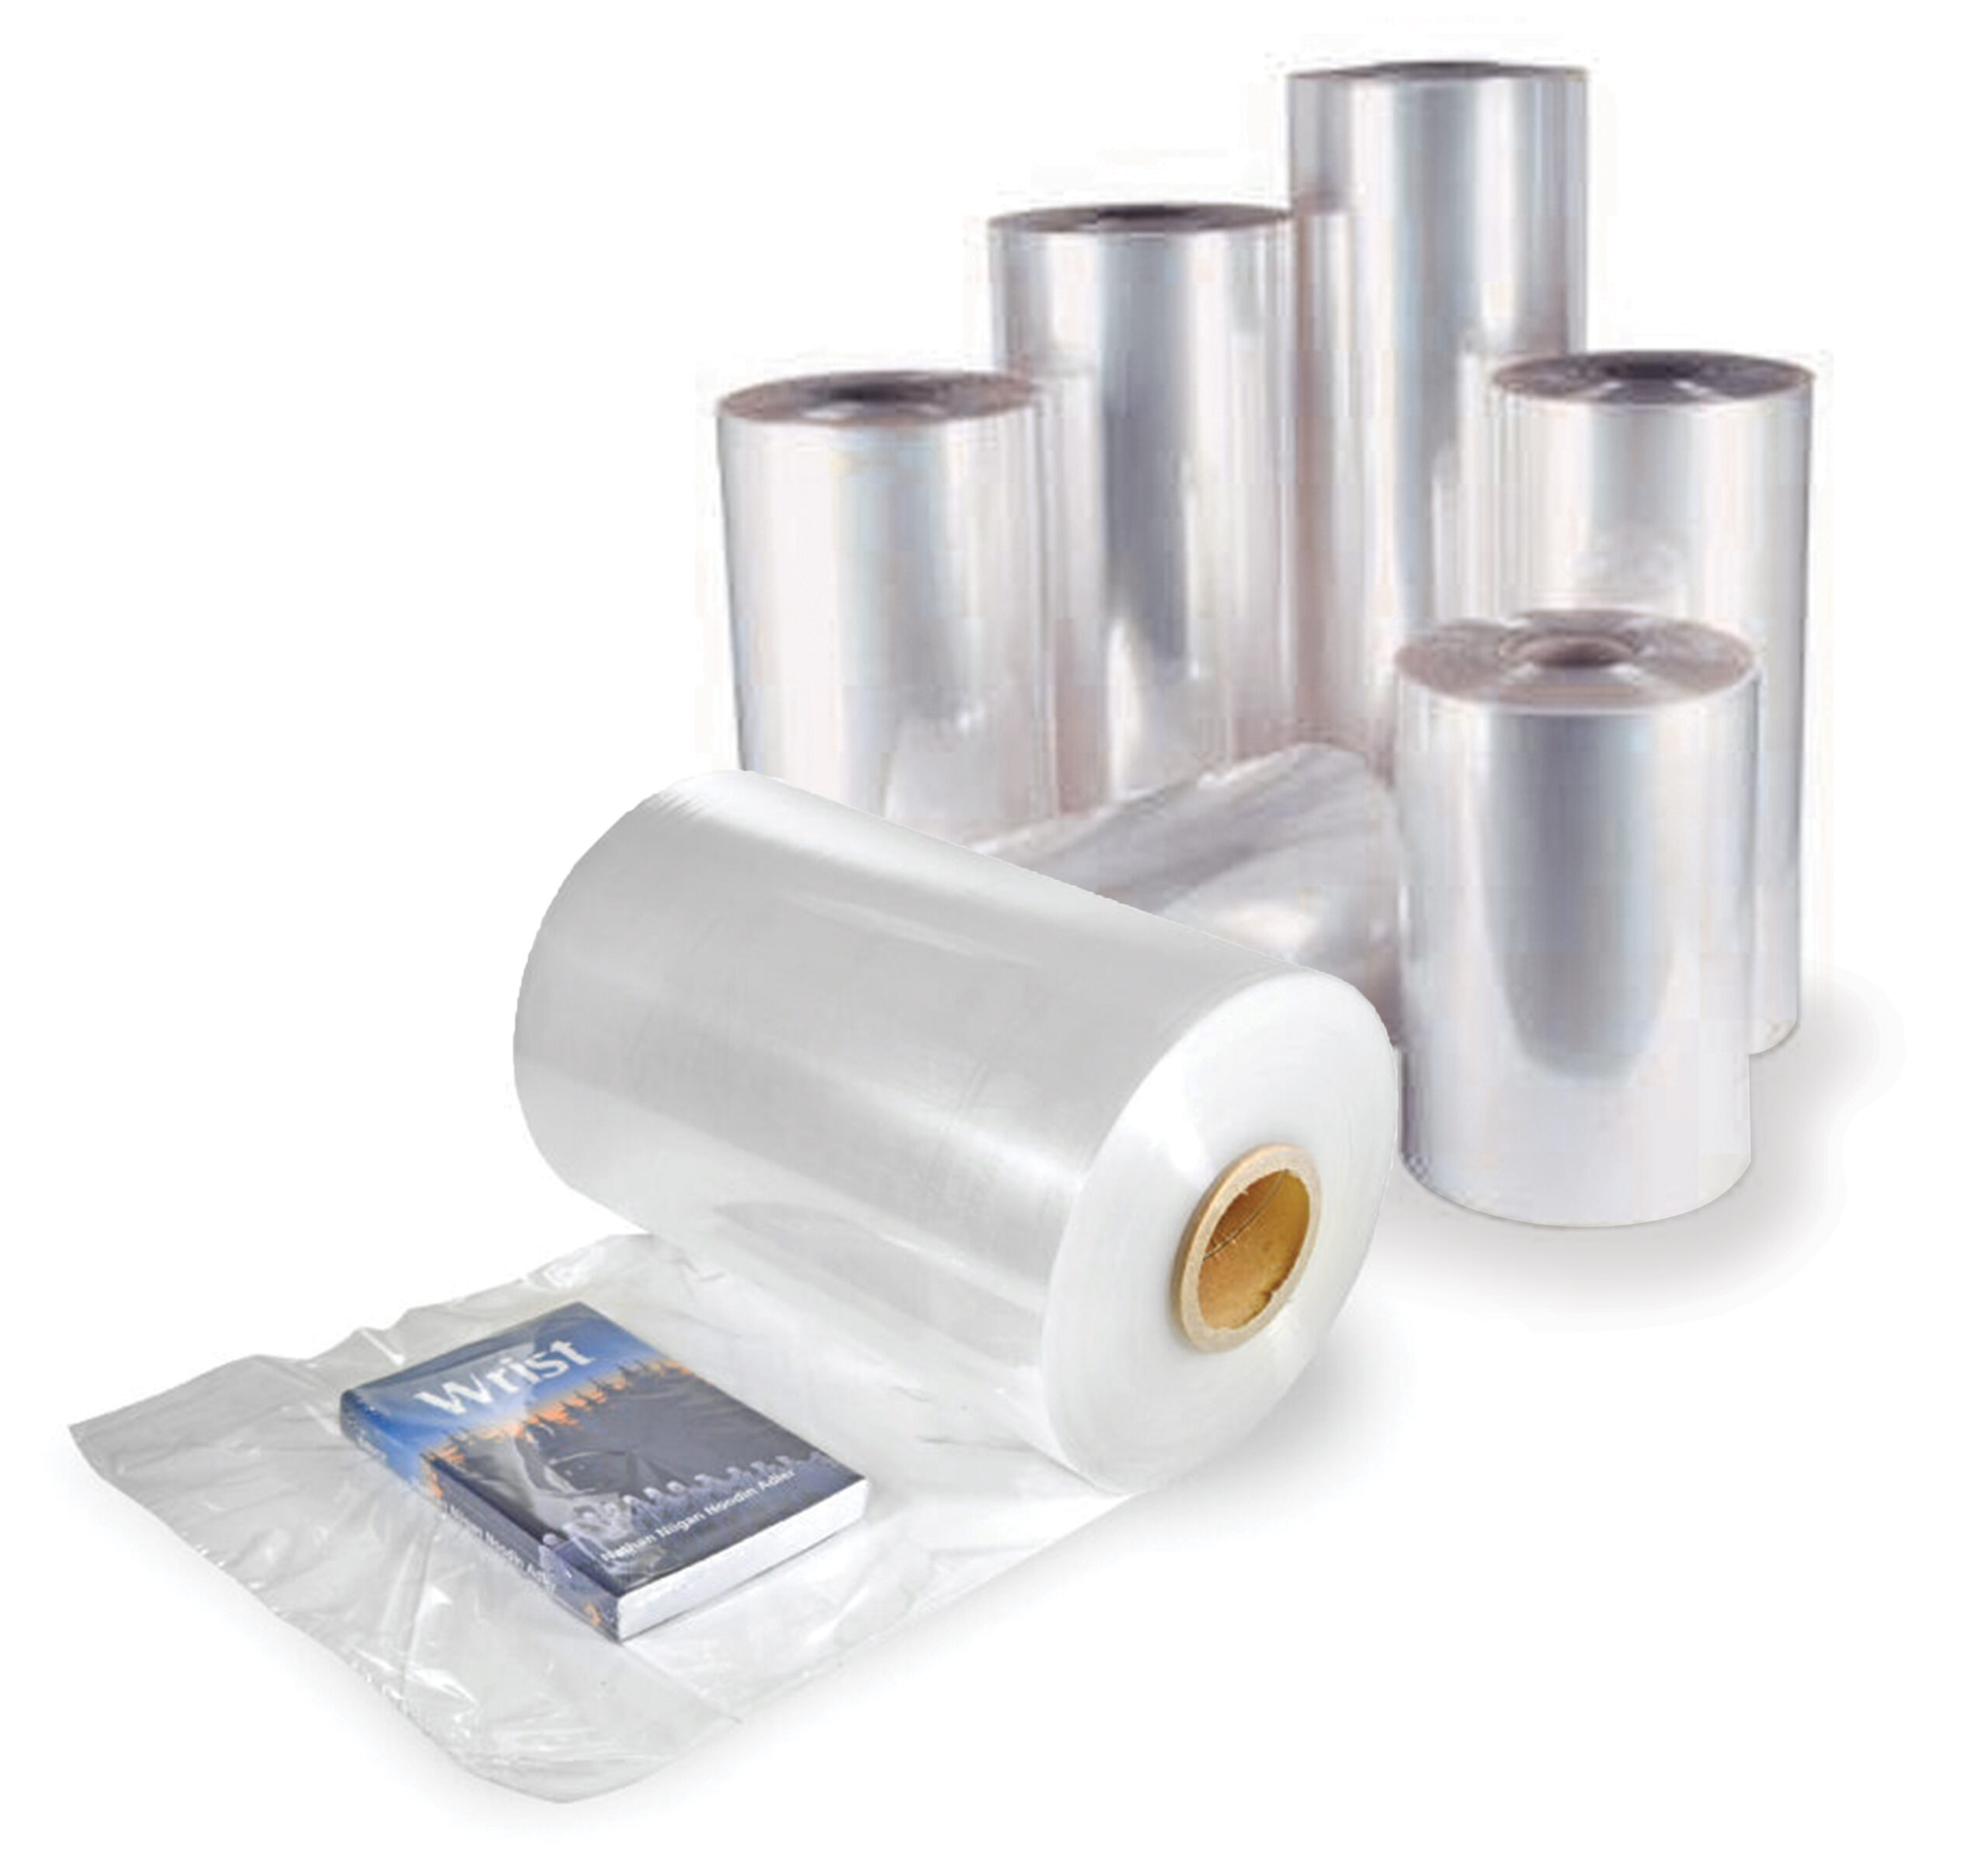 Understanding the Benefits of Shrink Wrap Film: Available at a